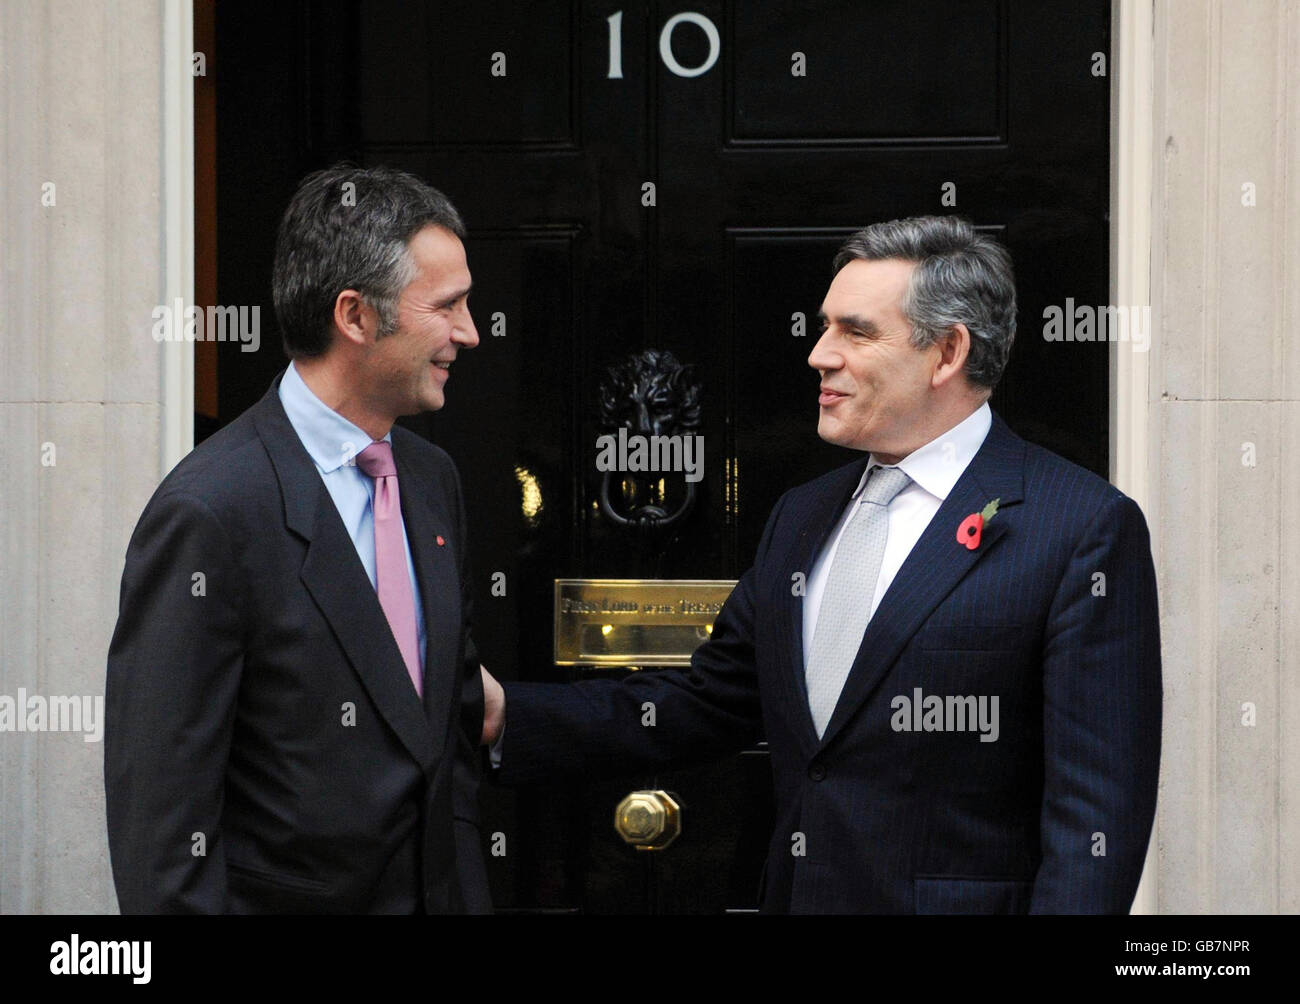 Prime Minister Gordon Brown says goodbye to his Norwegian counterpart Jens Stoltenberg at Downing St following talks. Stock Photo